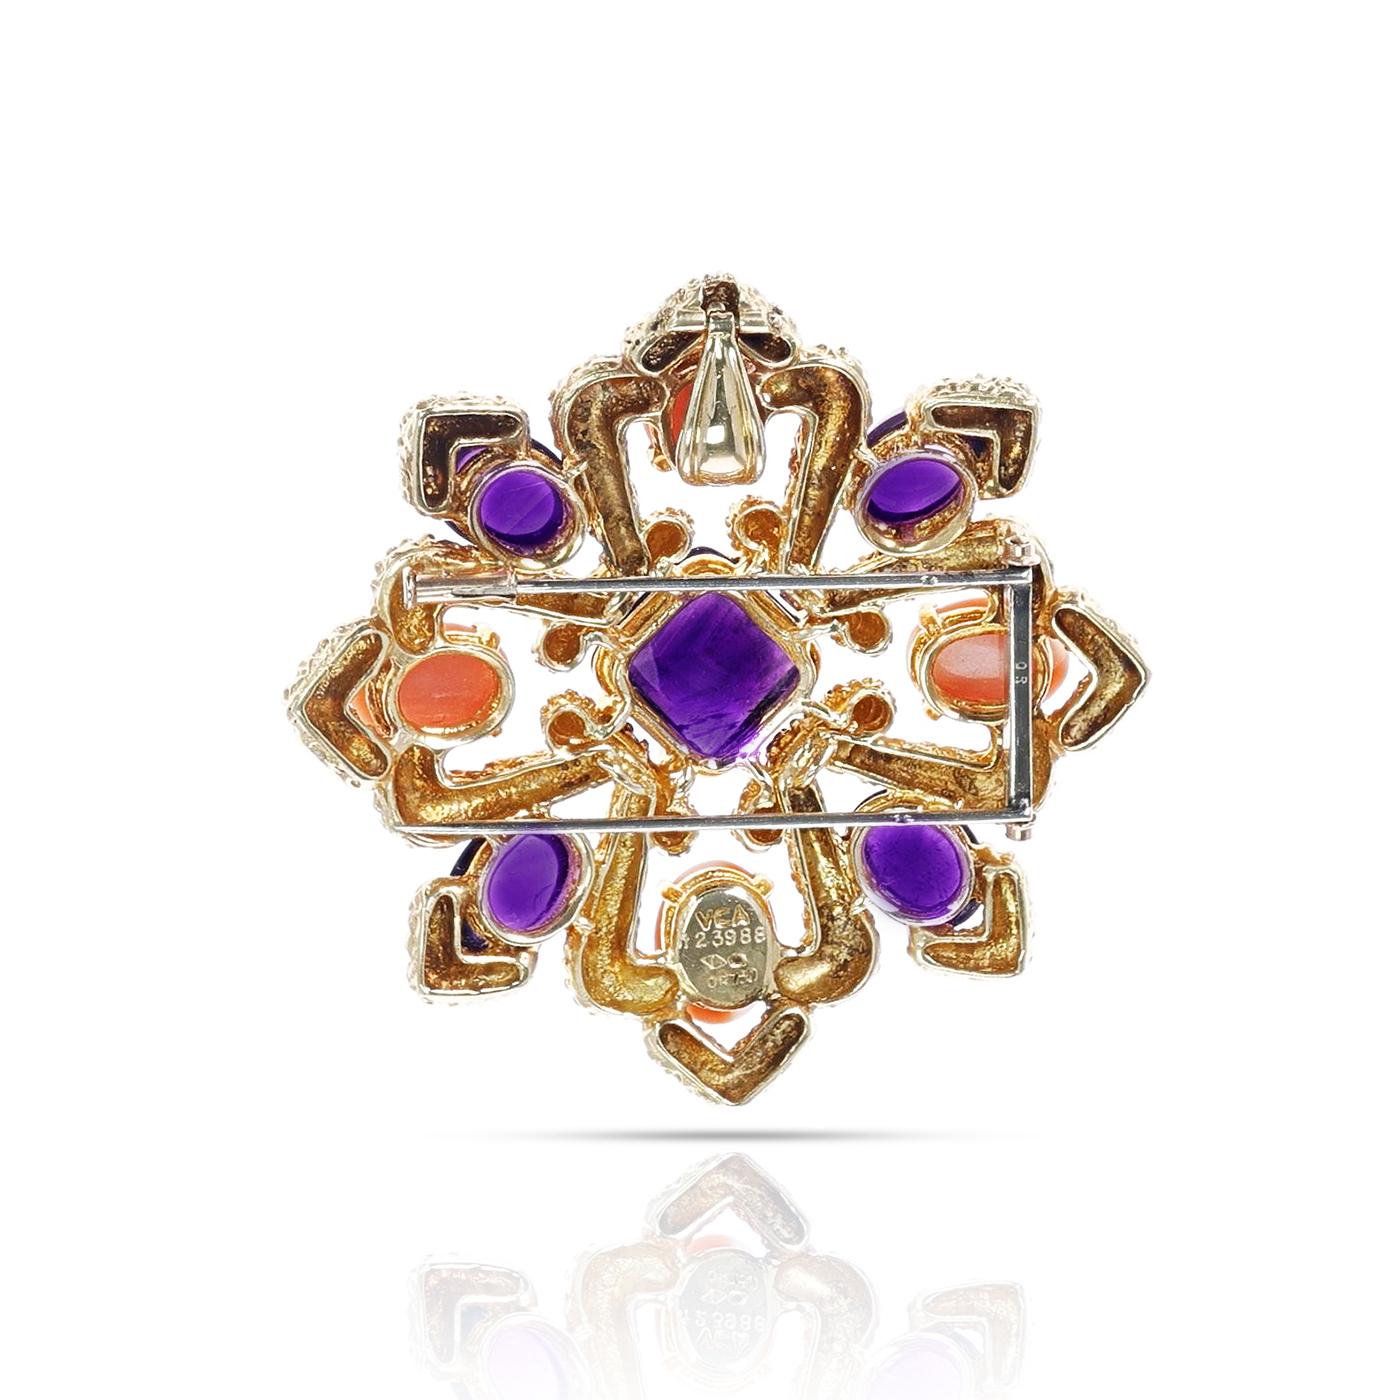 Van Cleef & Arpels Amethyst and Coral Cabochon Brooch, 18K Yellow Gold In Excellent Condition For Sale In New York, NY